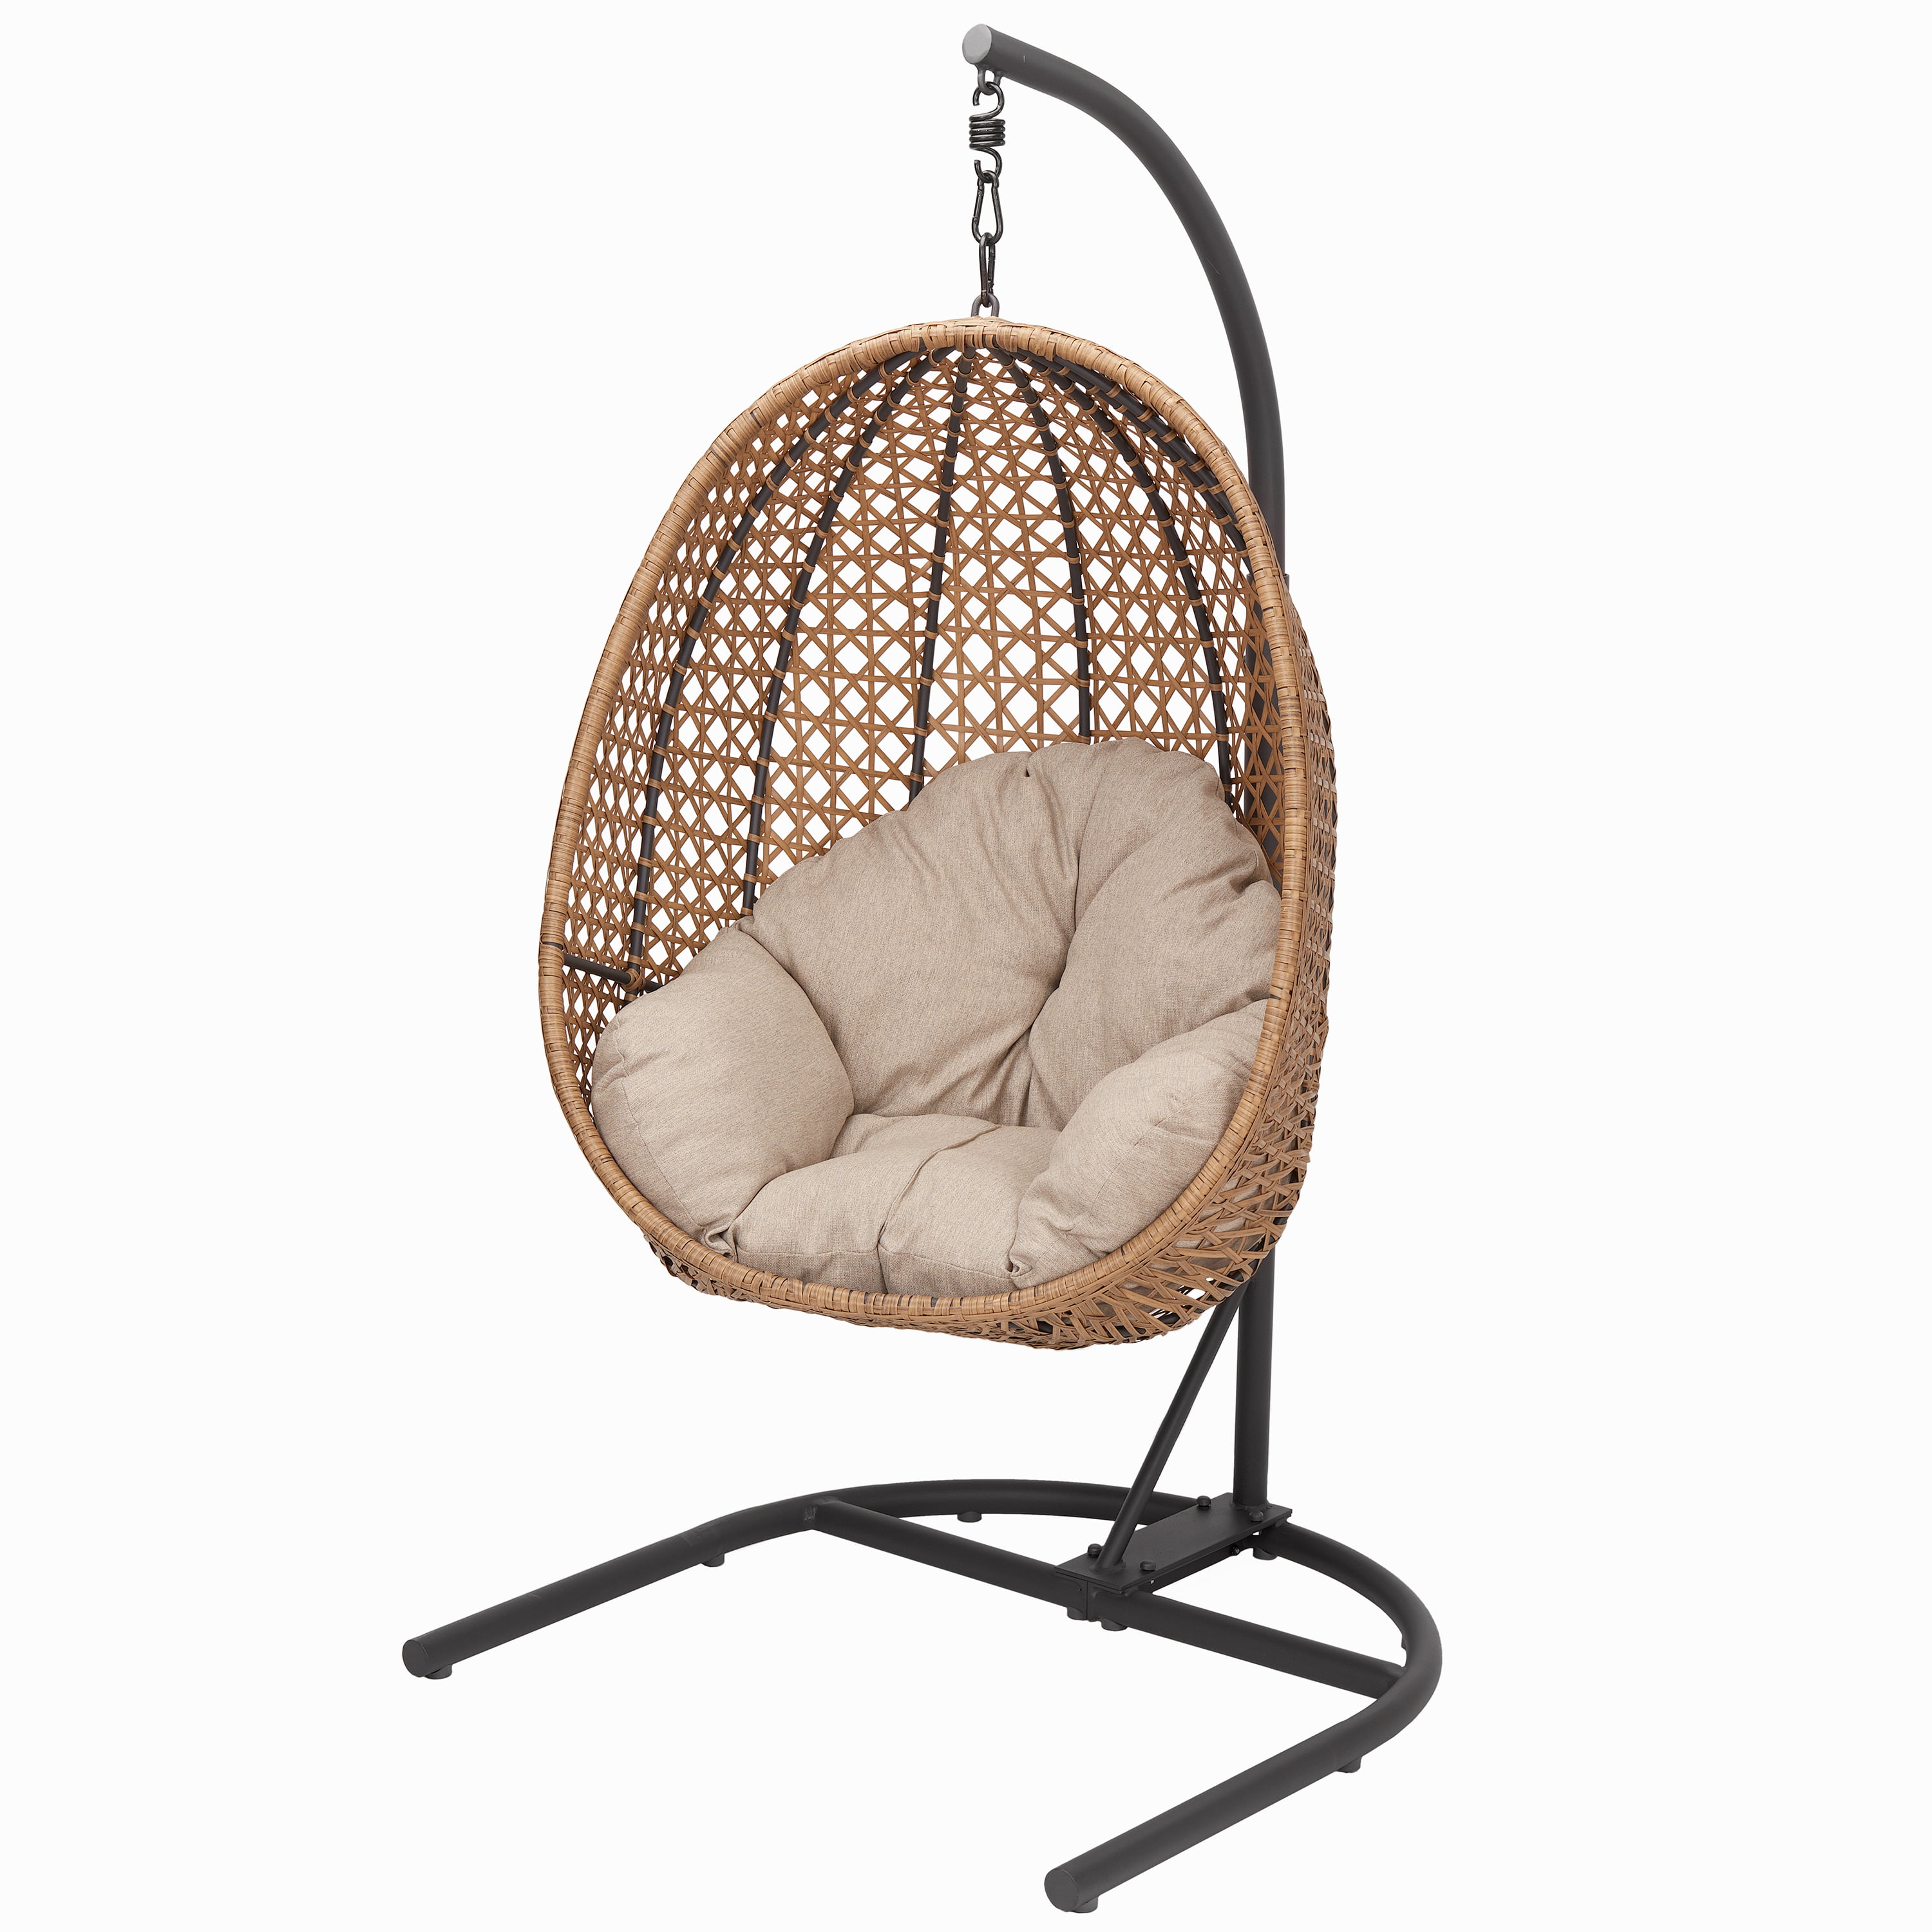 Better Homes & Gardens Lantis Patio Wicker Hanging Chair with Stand and